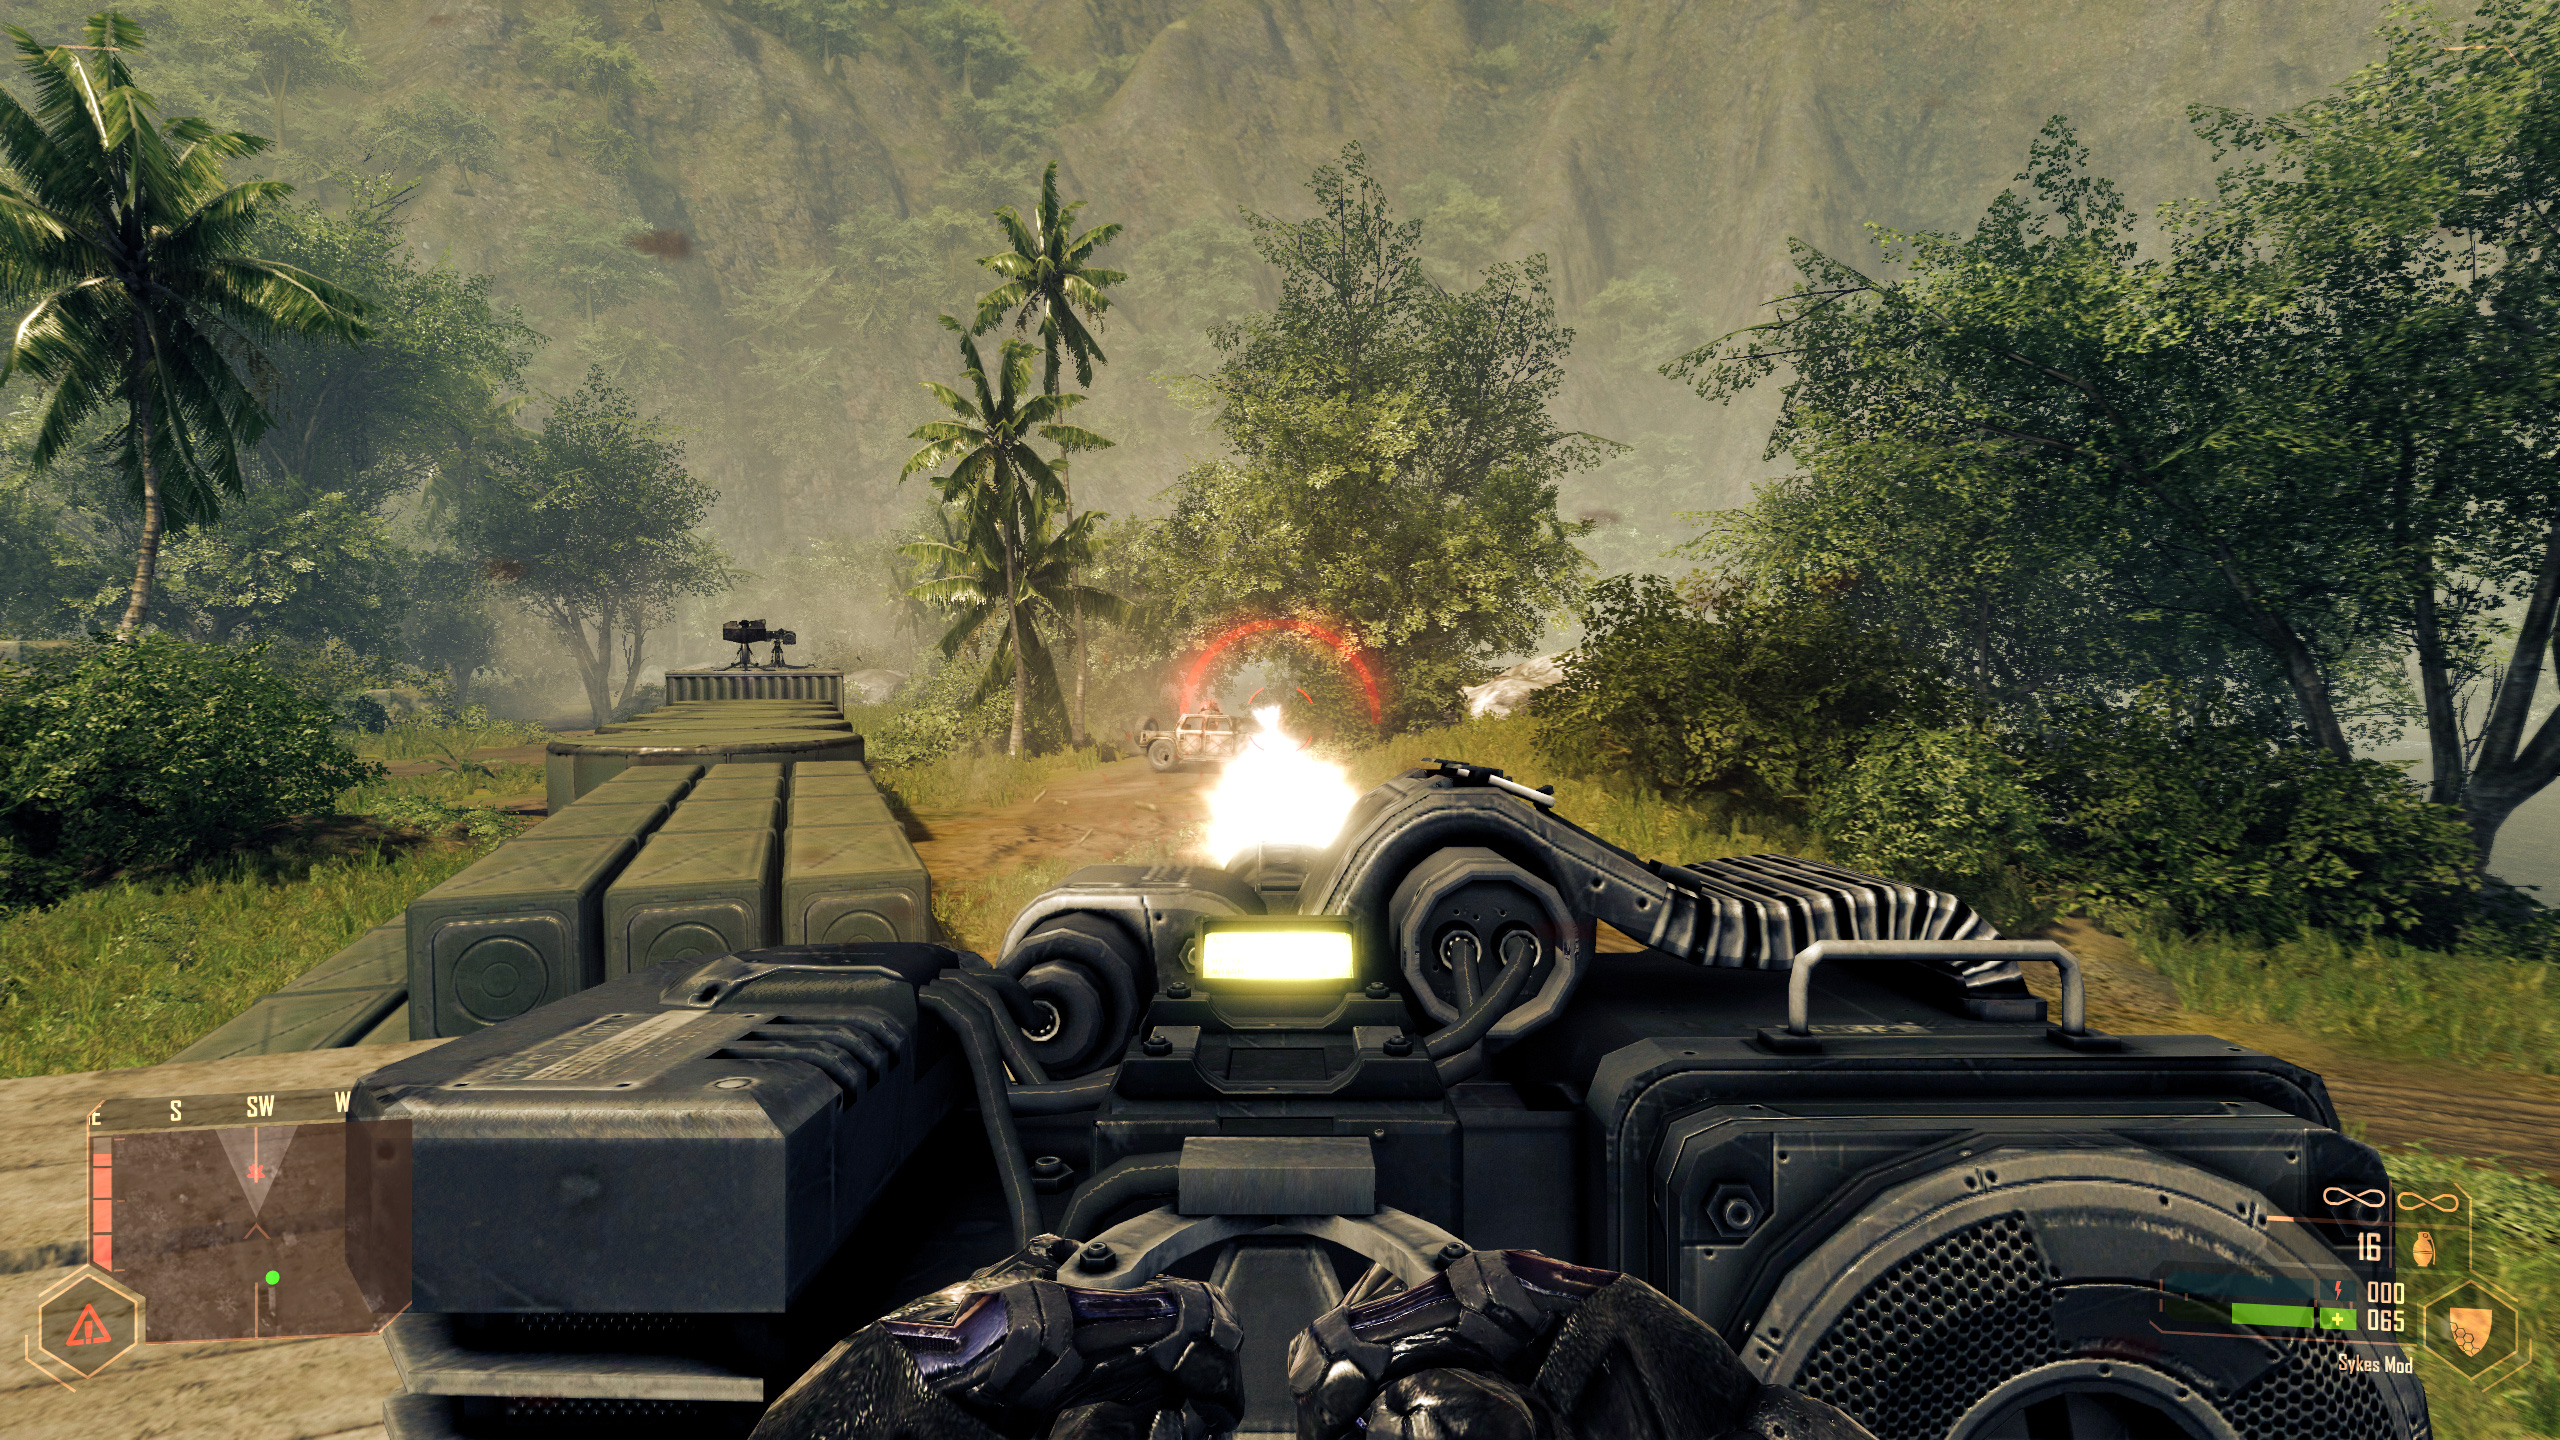 Is it necessary to play Crysis Warhead in order to enjoy the full game experience?